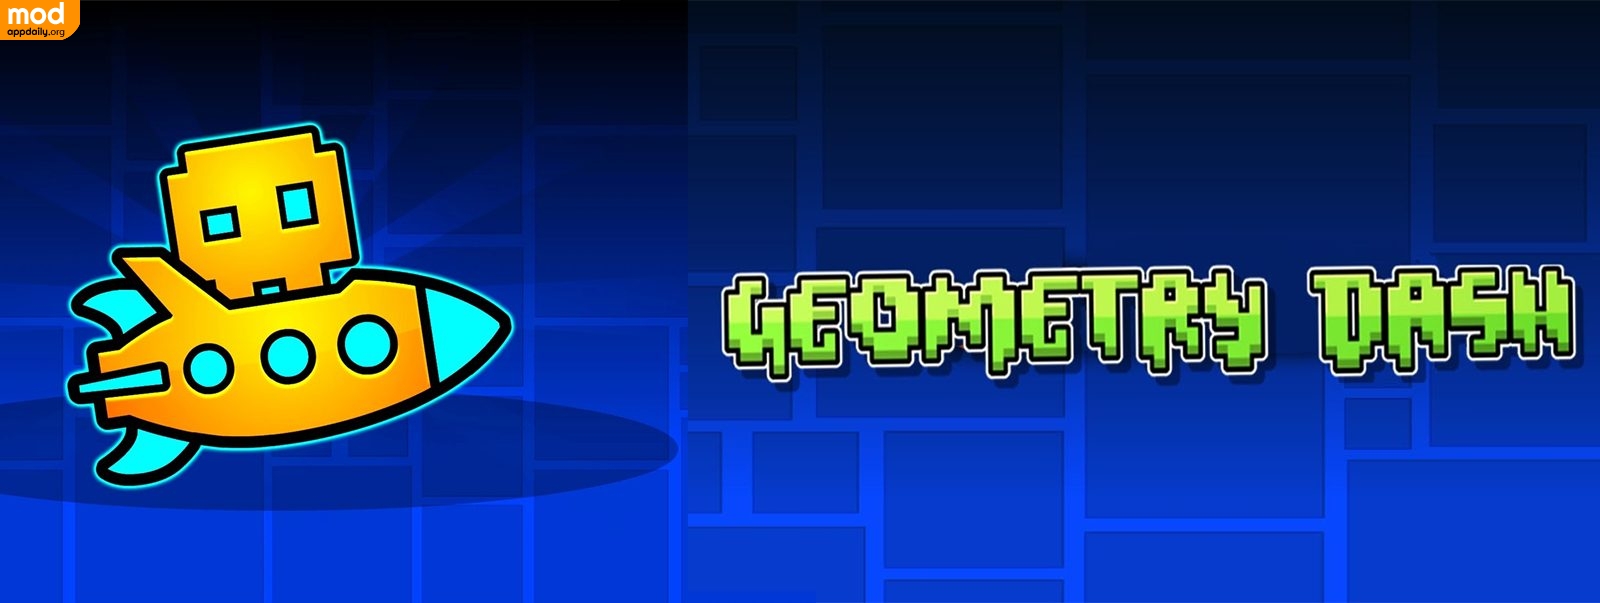 Geometry Dash includes a number of other settings in addition to the standard mode of surpassing that help keep the game from being monotonous